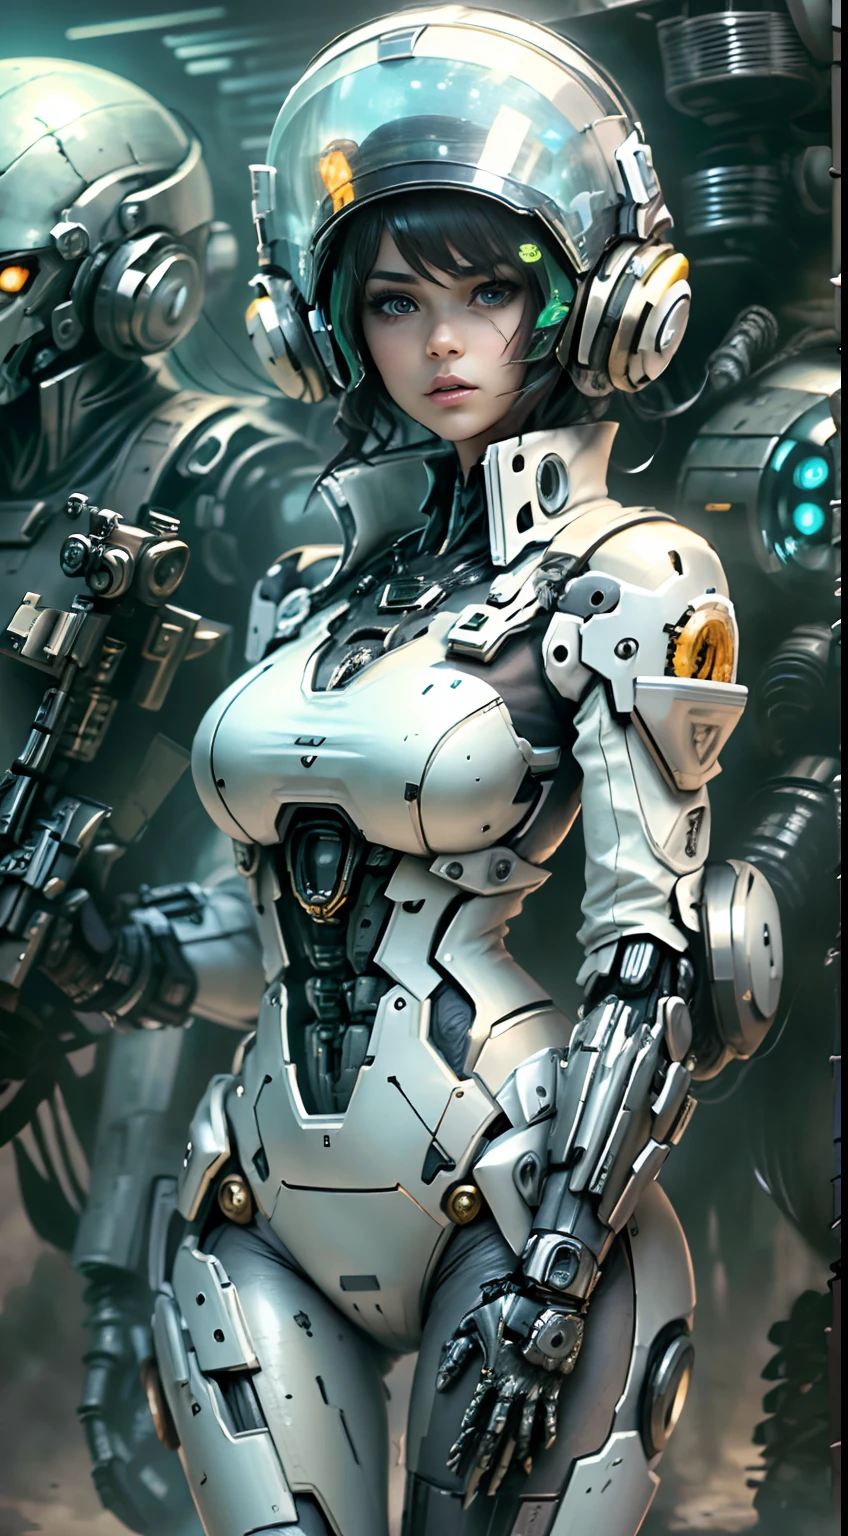 1 girl White Hair Soldier style gun in the background, Girl in White Mech, Cyberpunk anime mecha girl, Wearing sci-fi military armor, Beautiful black cyborg girl, Cyborg - Silver Girl, Me negro de Fira, Eco the Overwatch, Perfect anime cyborg woman, blue pupils, Five fingers, CGhSociety inspired battlefield, alien planet, Alien battle,